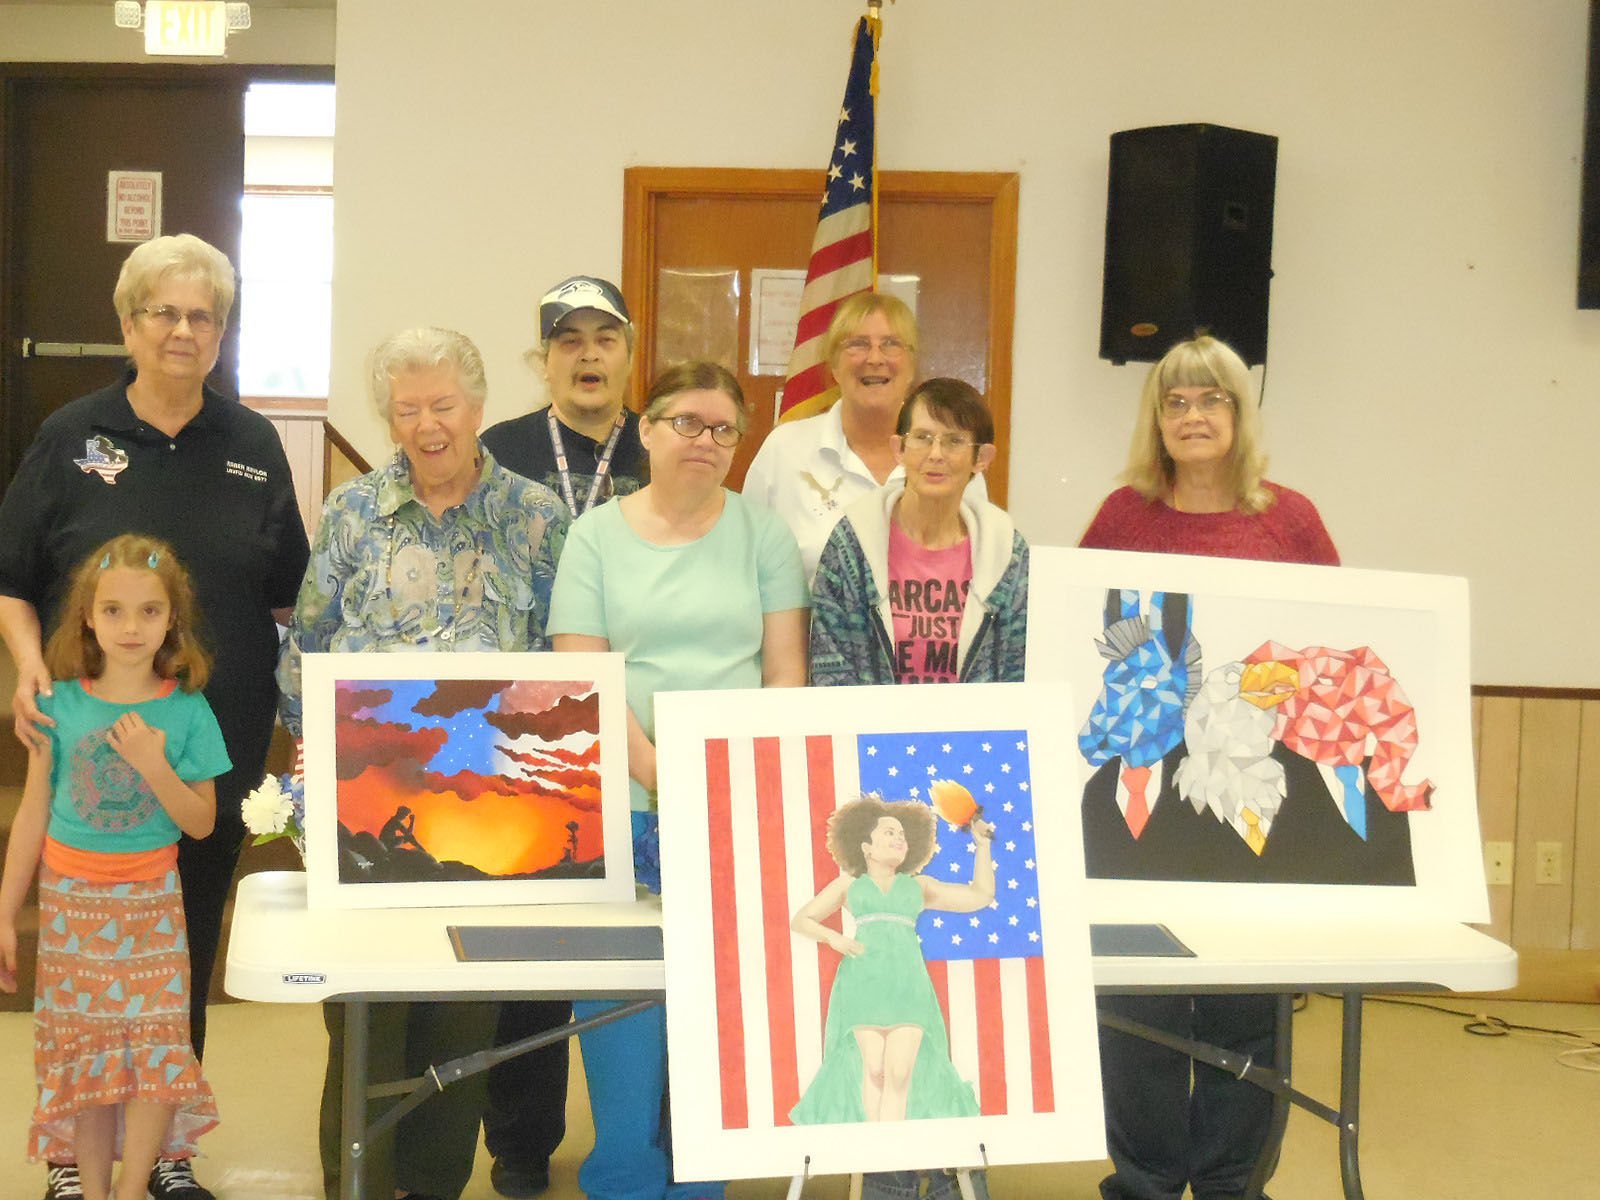 My Art students swept the Patriotic Art competition — Bryn Gillette